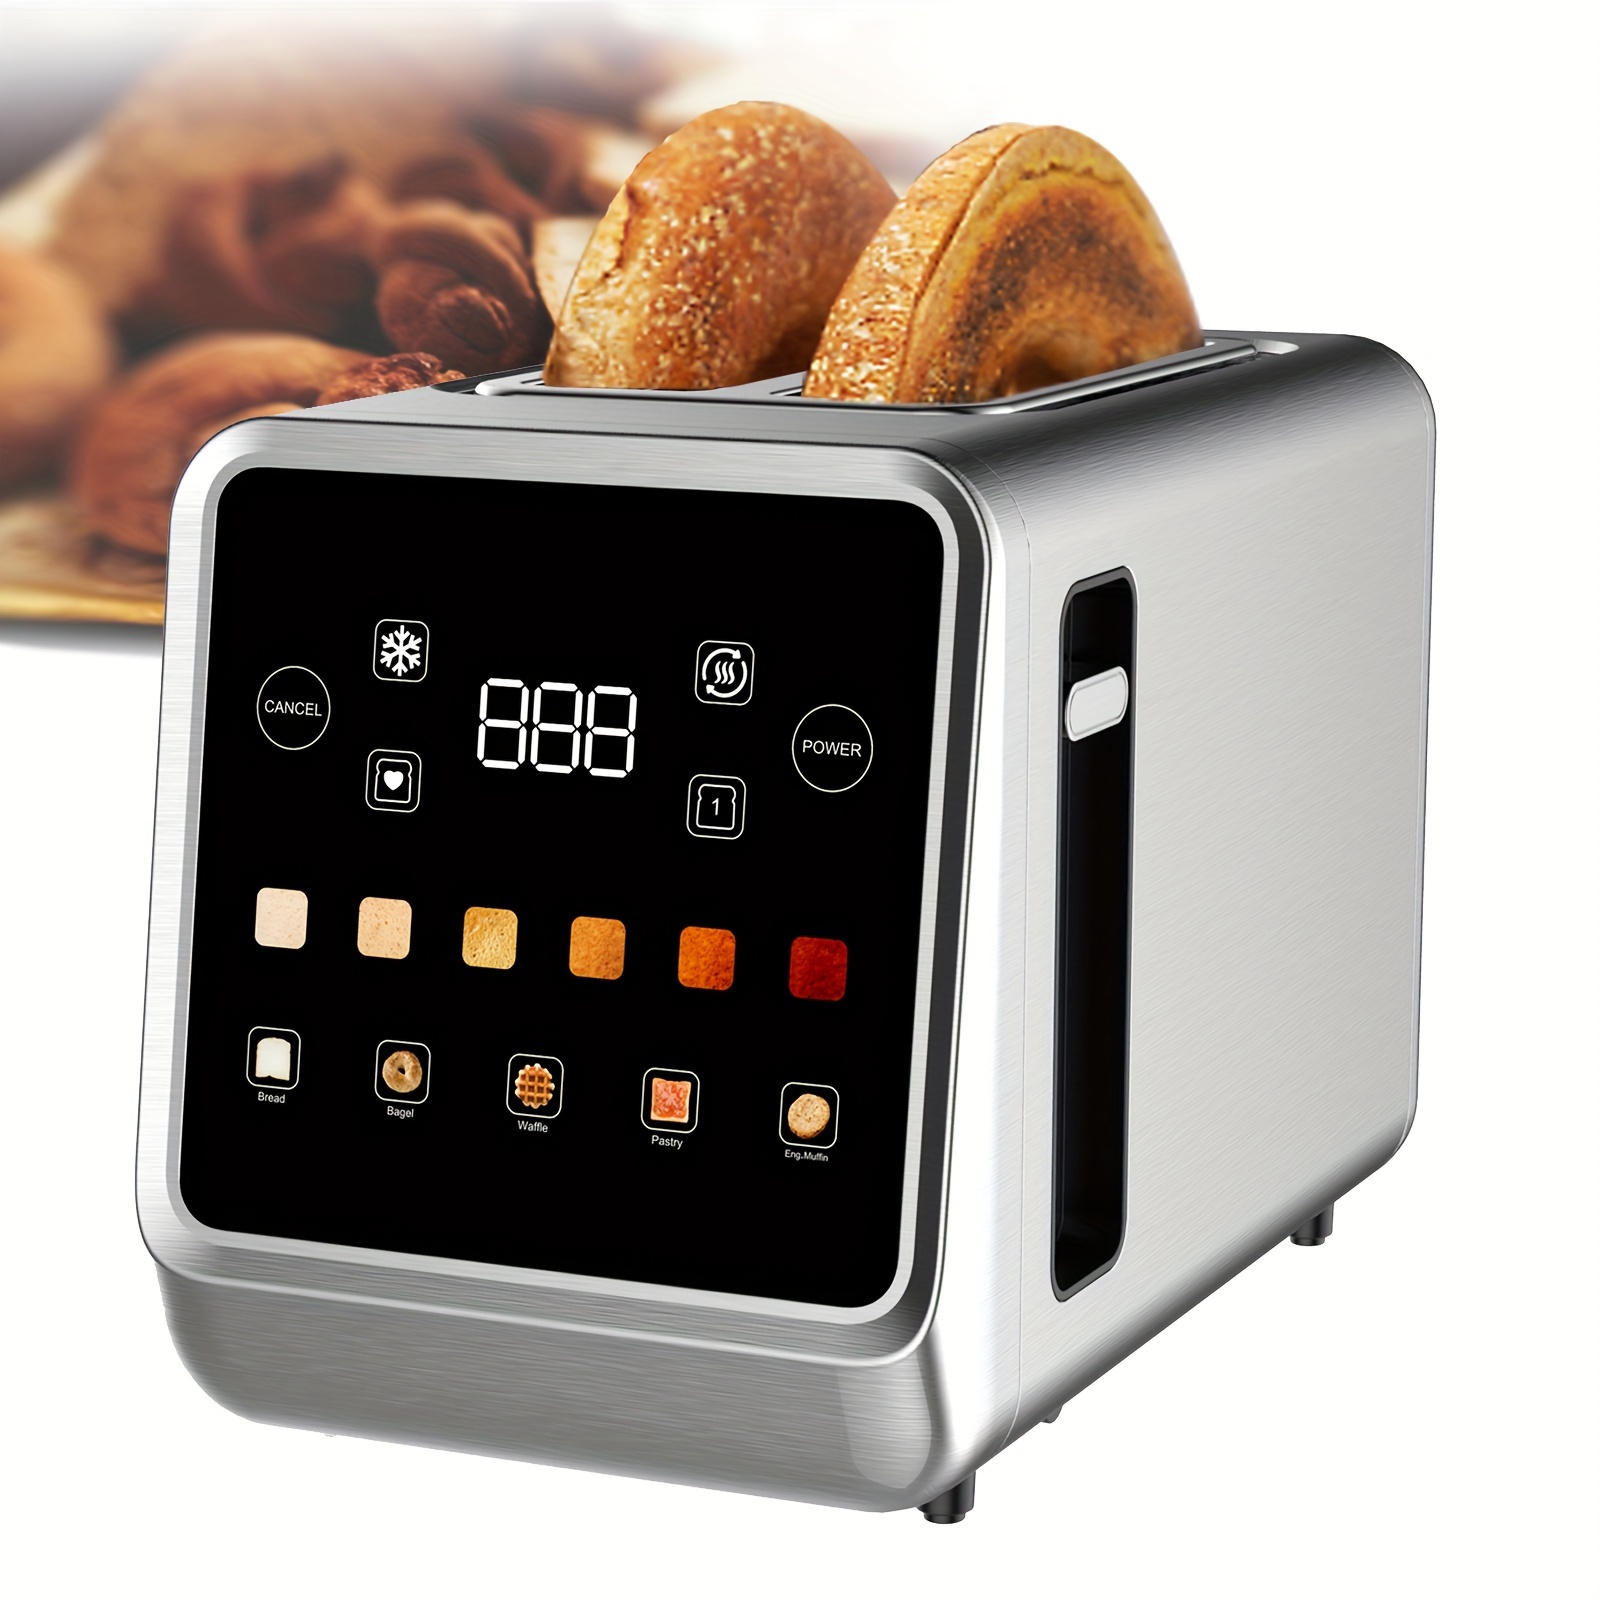 

Toaster Touch Screen Toaster 2 Slice With Lcd Display Stainless Steel Digital Timer Toaster 6 Bread Types& 6 Shade Settings Smart Extra Wide Slots Toaster With Bagel Cancel, Defrost Functions